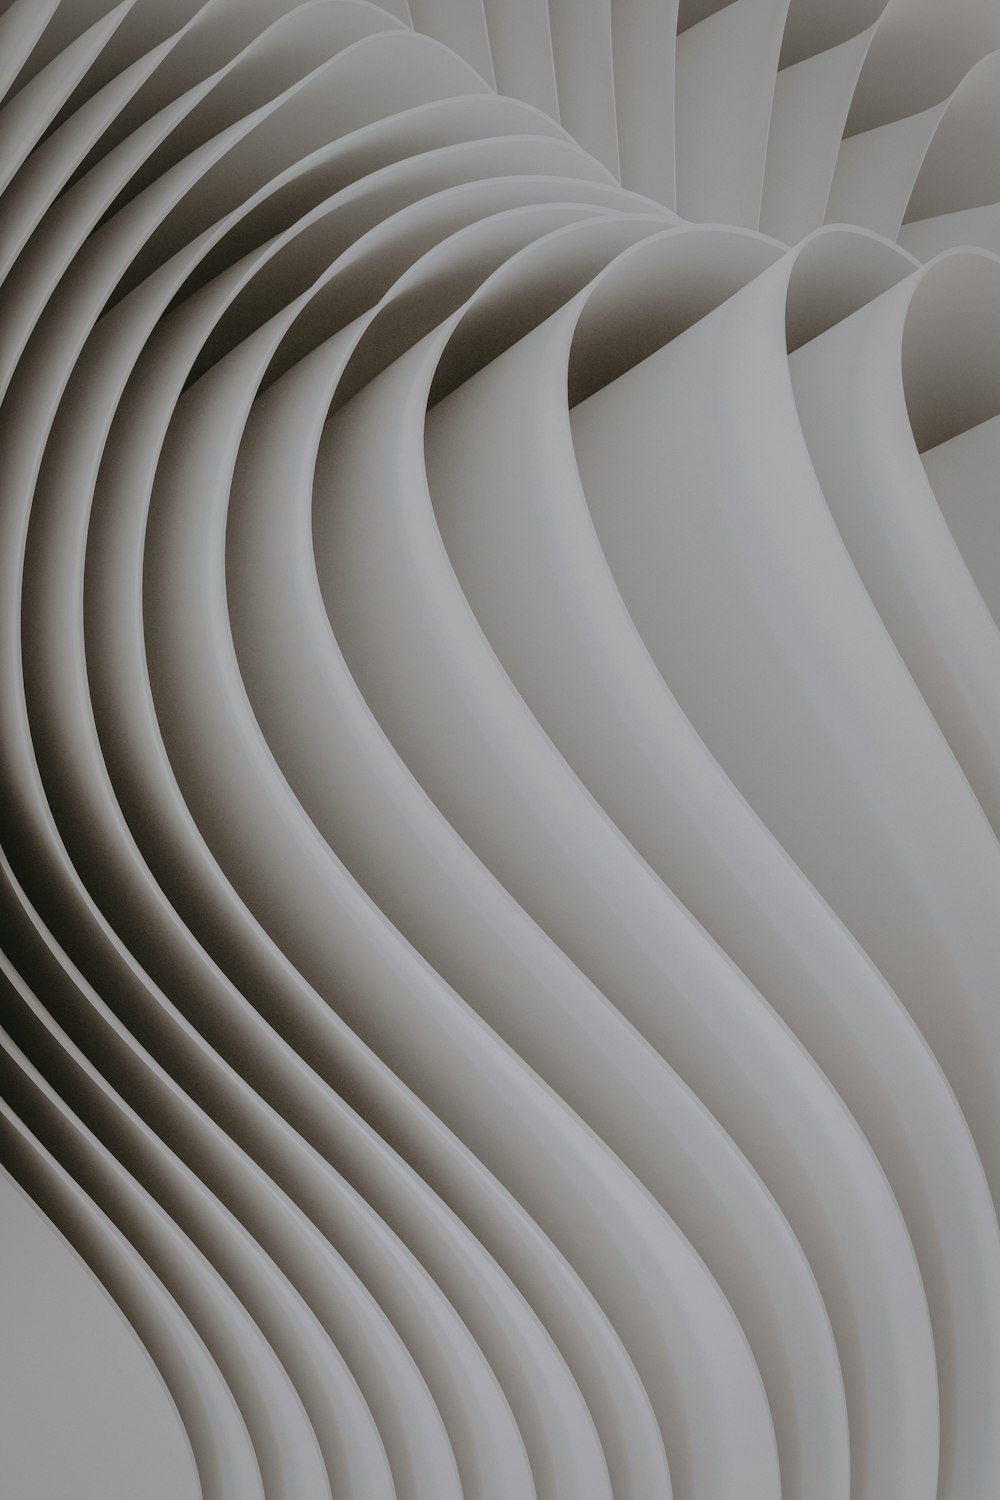 an abstract image of wavy lines on a white background